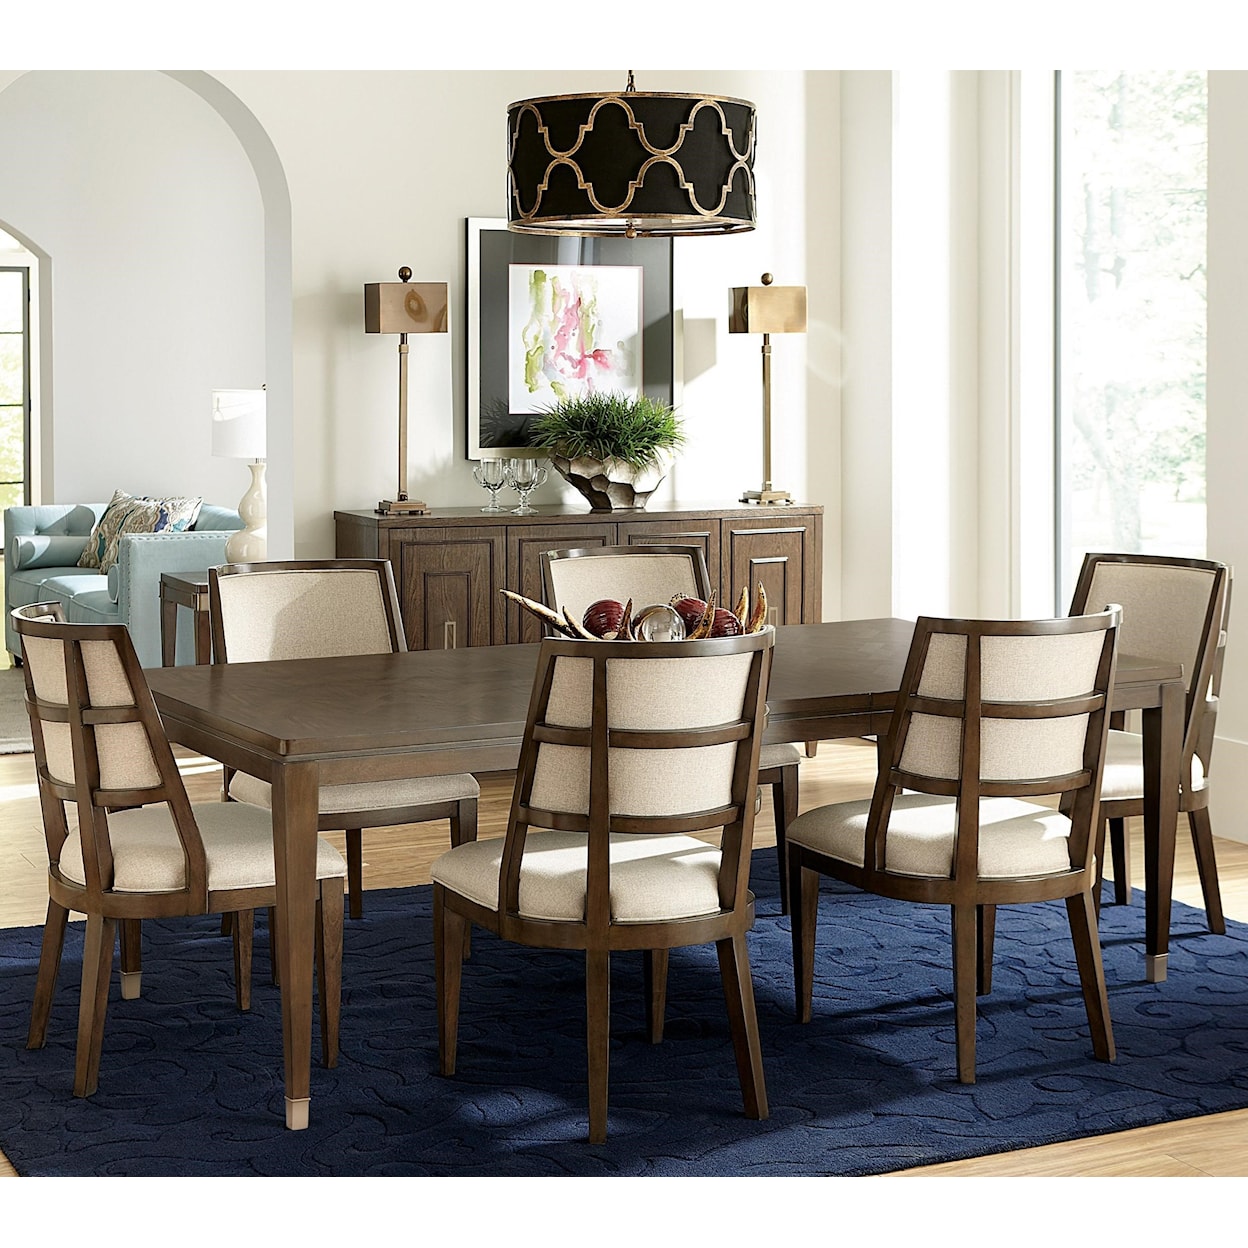 Carolina River Monterey 7-Piece Table and Chair Set